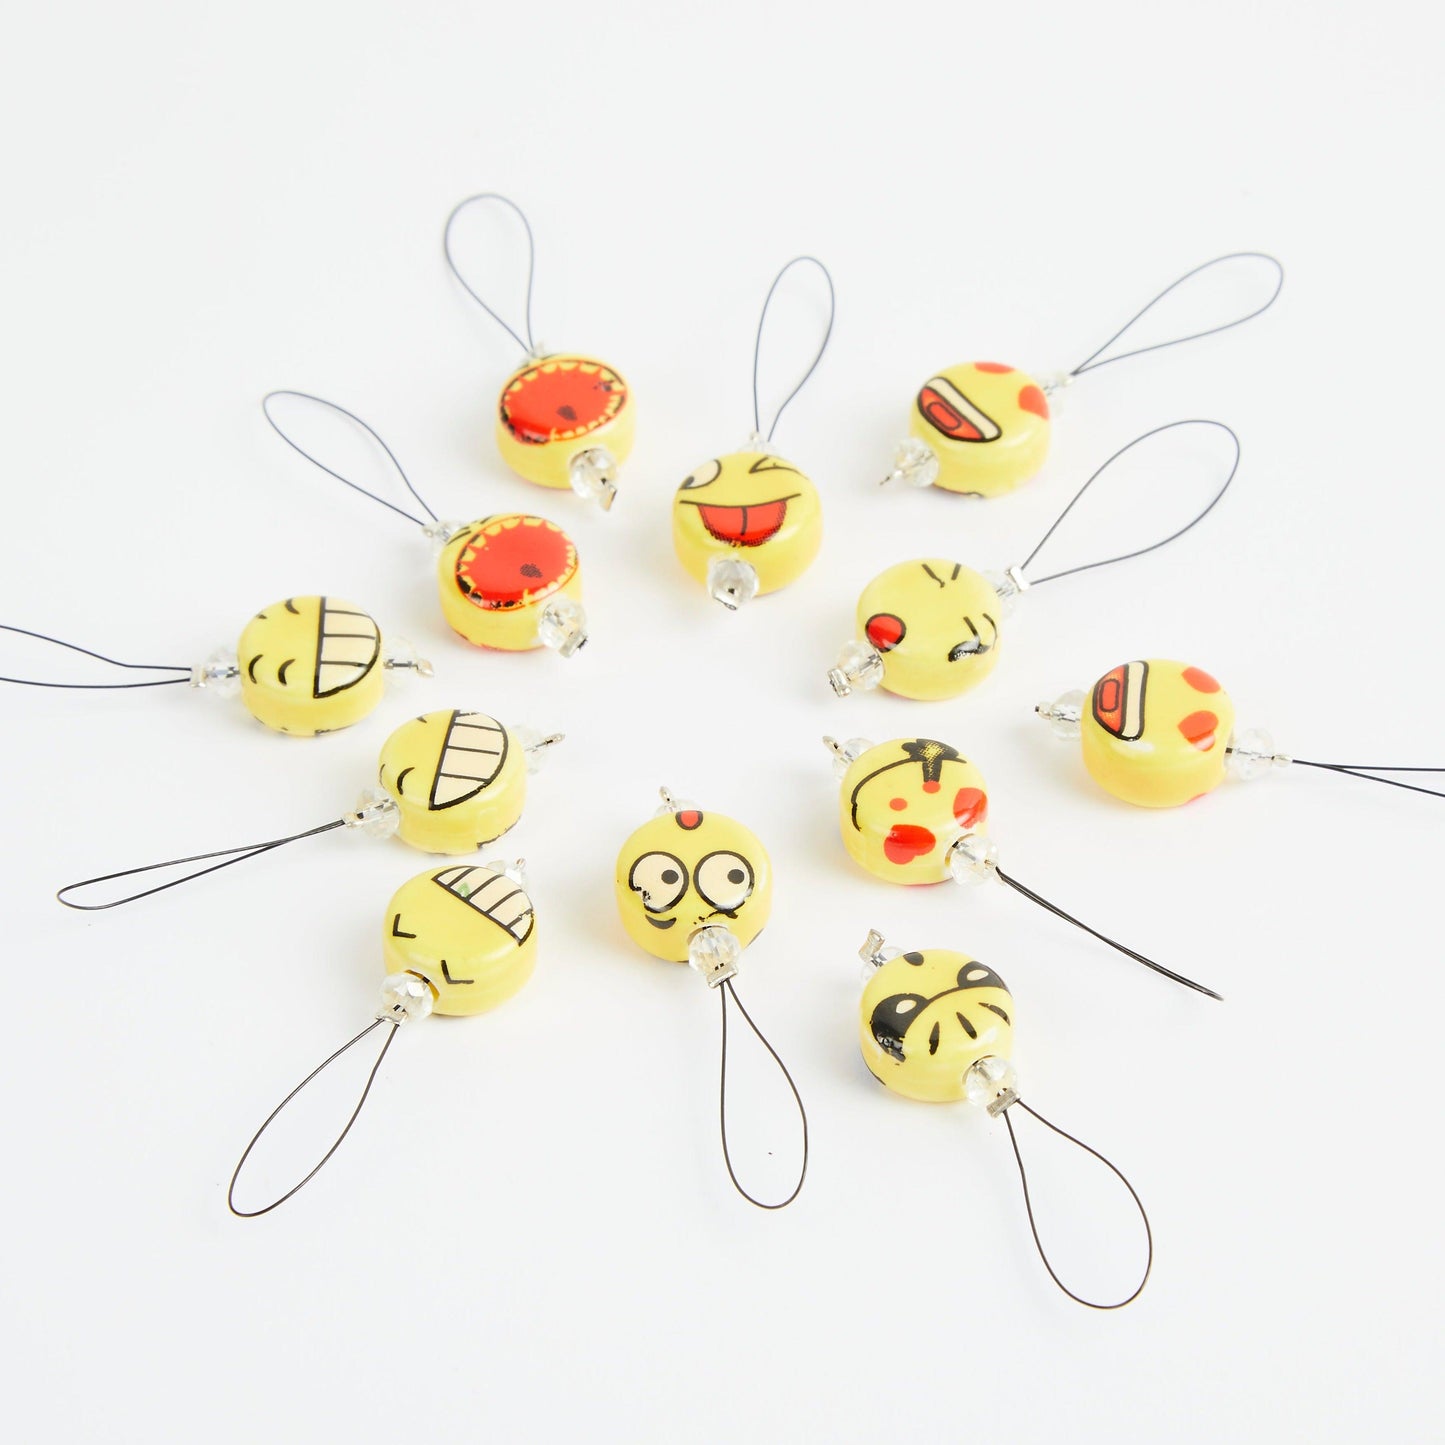 KnitPro NEW ZOONI Stitch Markers in Playful Beads "Smileys" (11251)